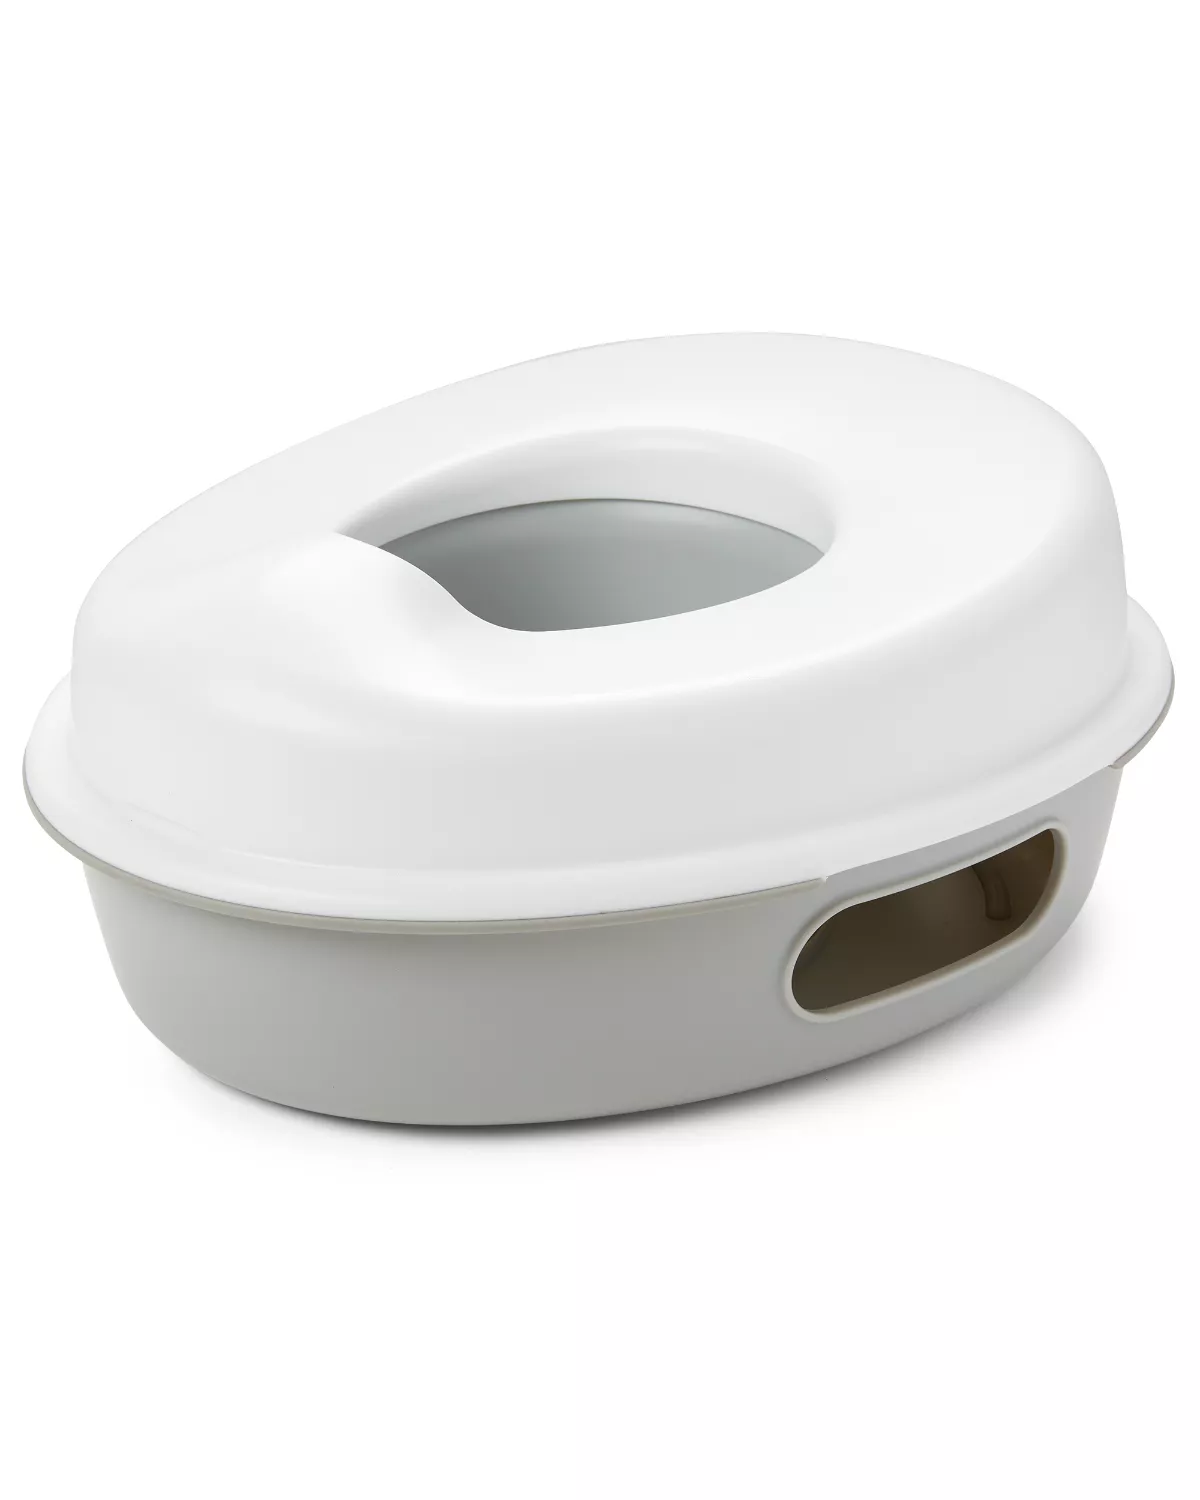 SkipHop Go Time 3-In-1 Potty